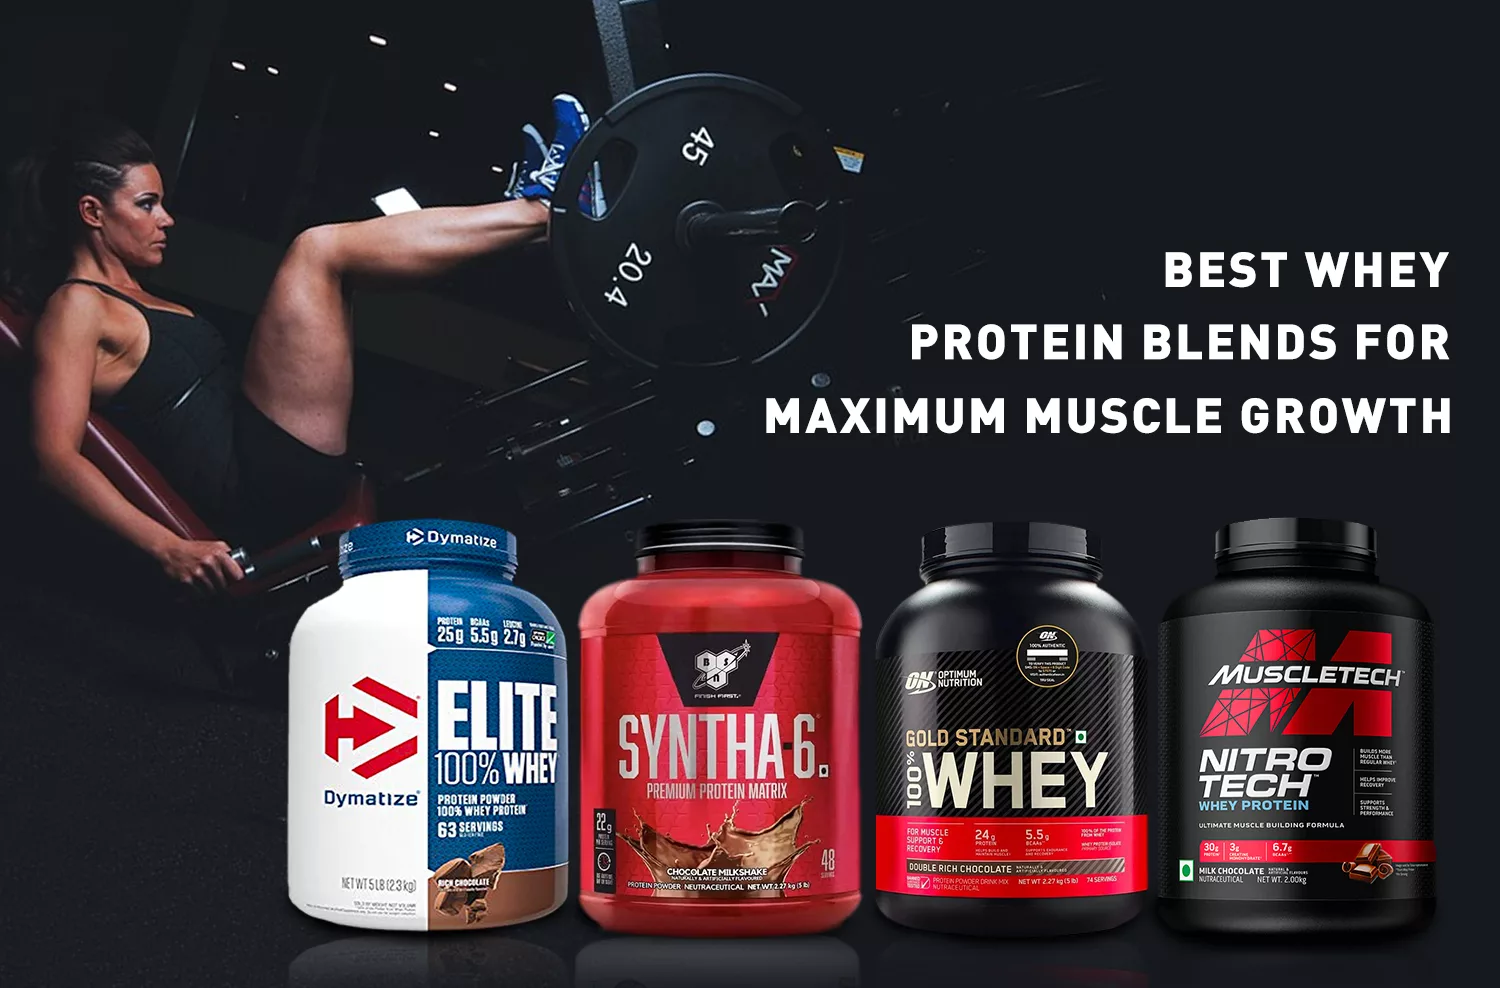 Best Whey Protein Blends for Maximum Muscle Growth